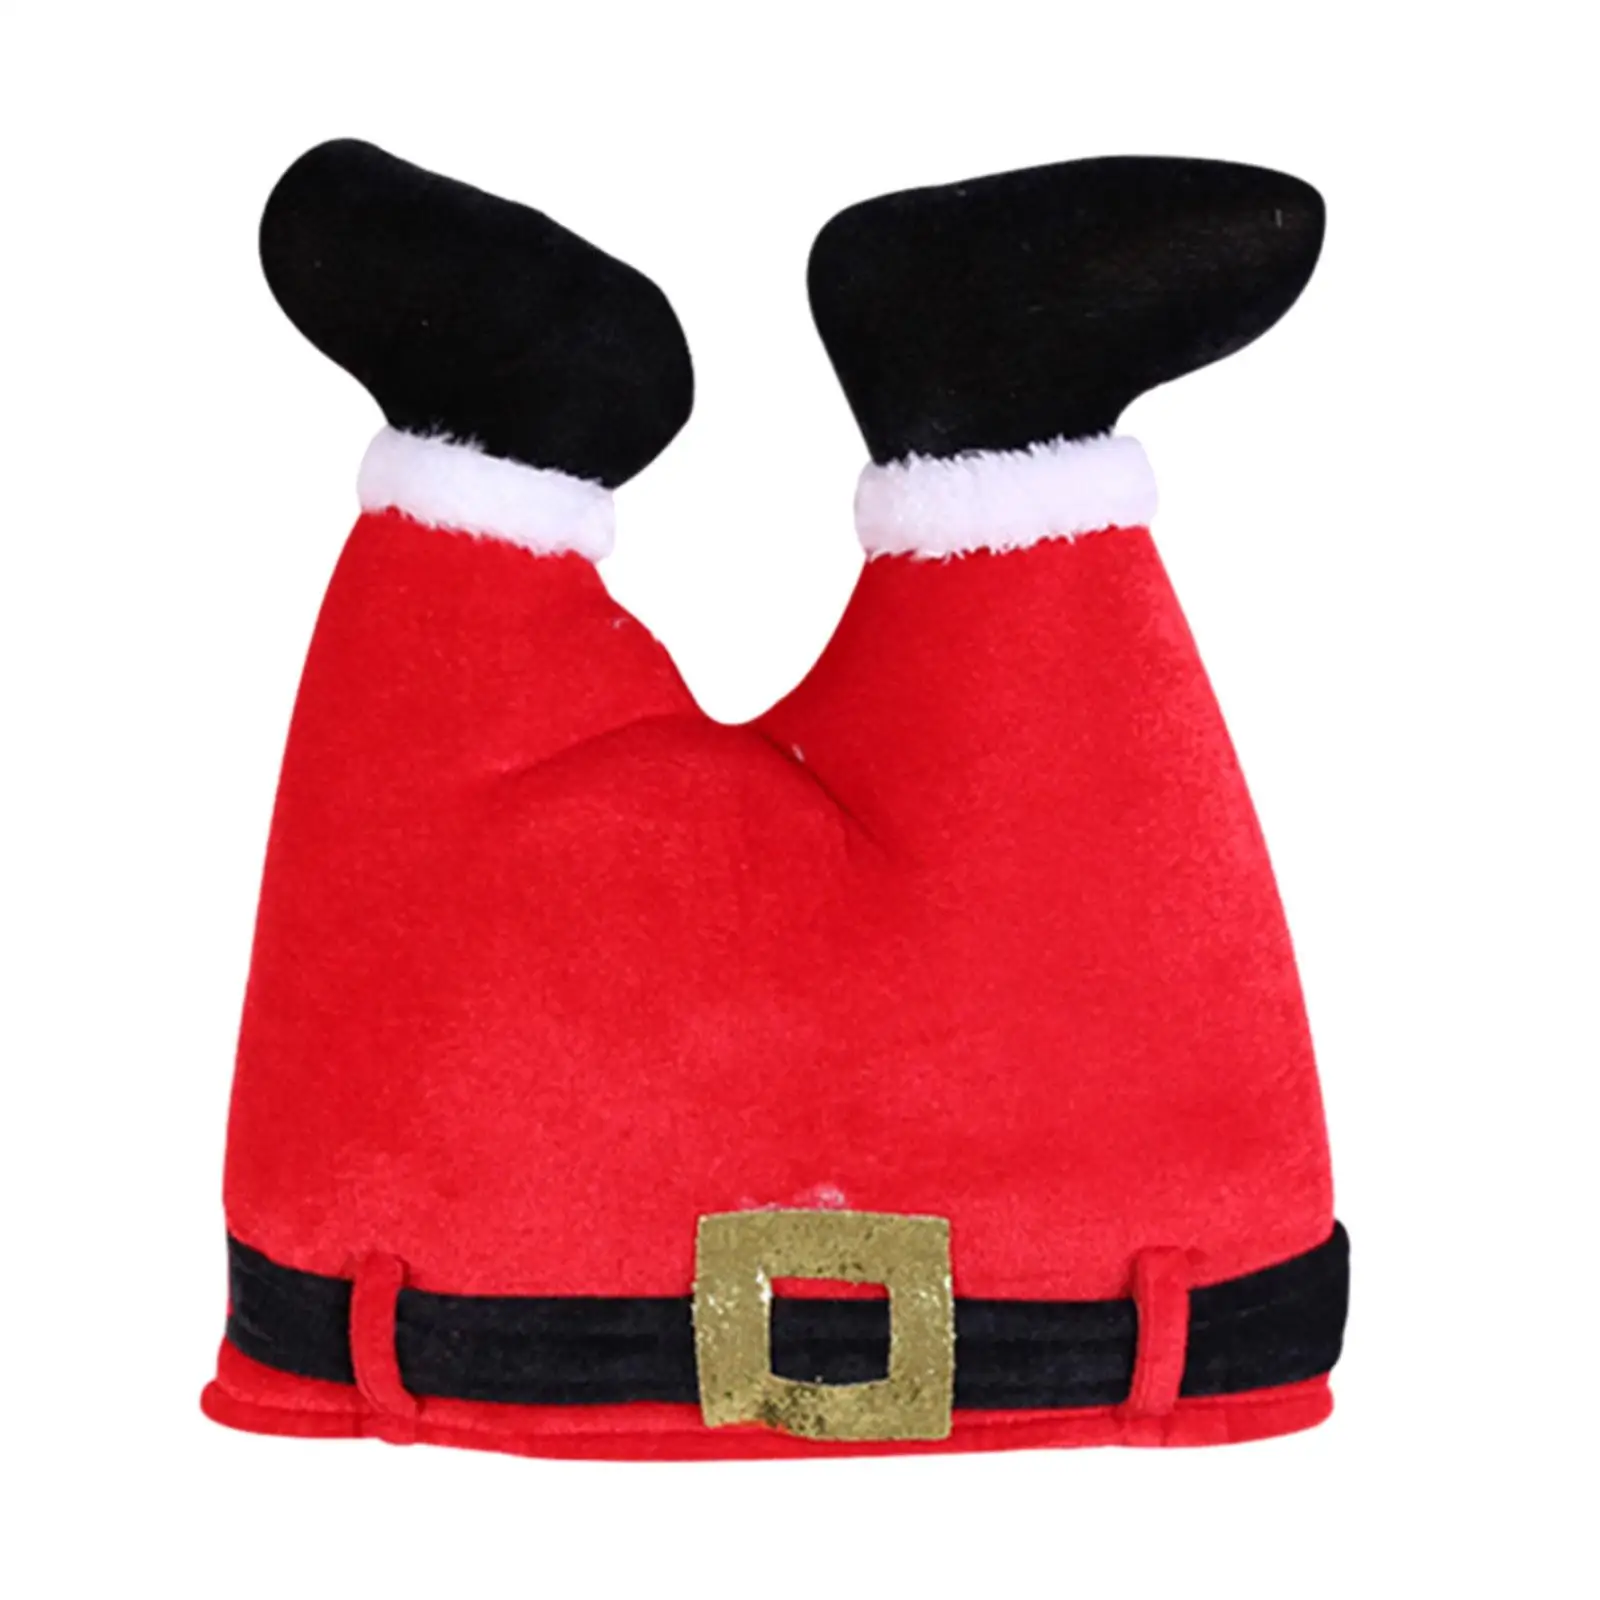 Chrismas Hat Comfortable Novelty Adult Kids Photography Prop Xmas Hat for Party Festival Cosplay Costume Celebrations Christmas